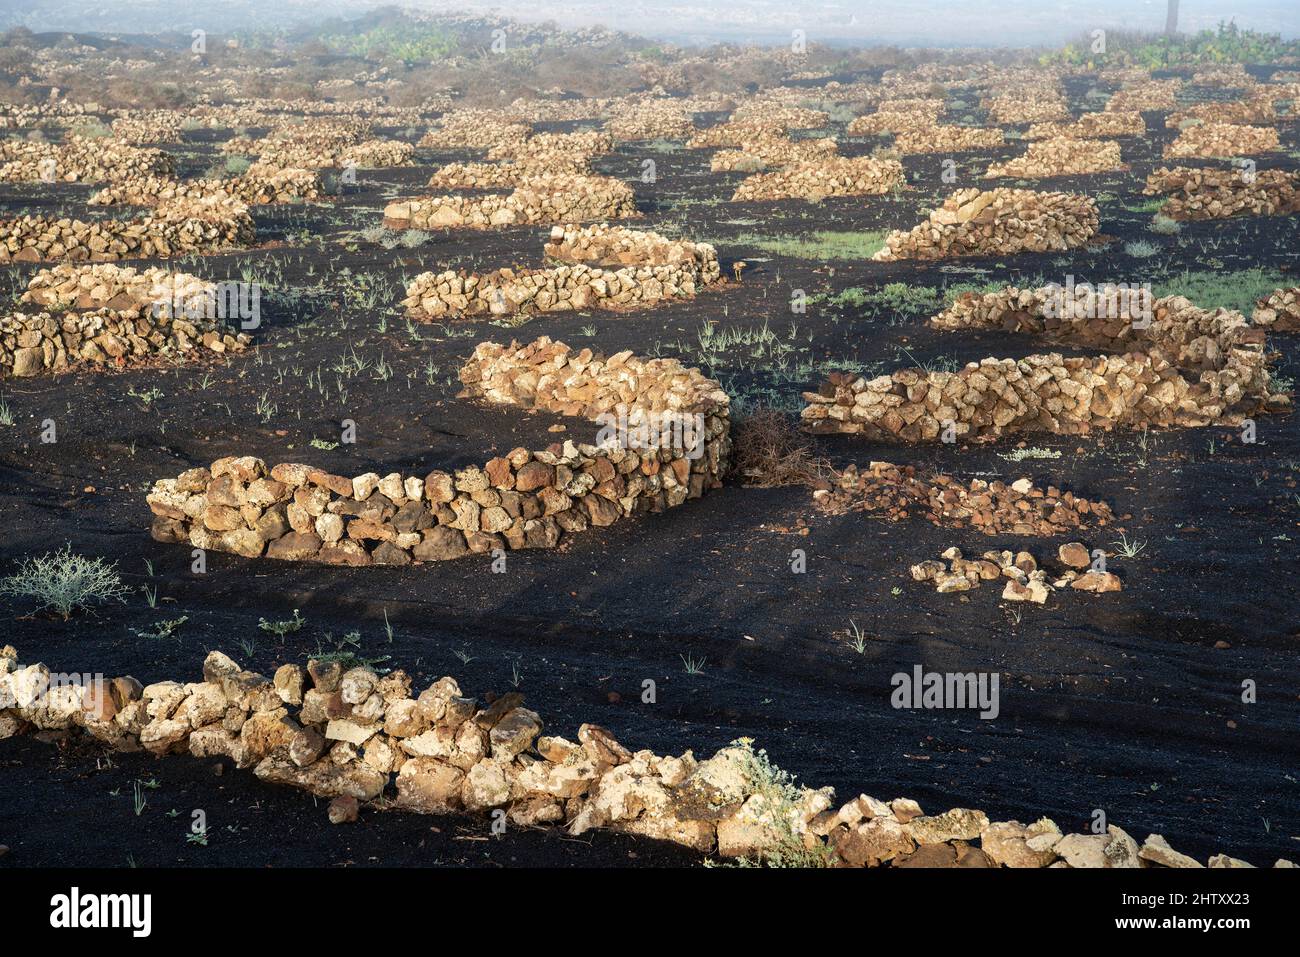 Vines with walls made of lava rock, in the morning mist, viticulture on volcanic ash in dry farming method, La Geria, Lanzarote Island, Canary Stock Photo